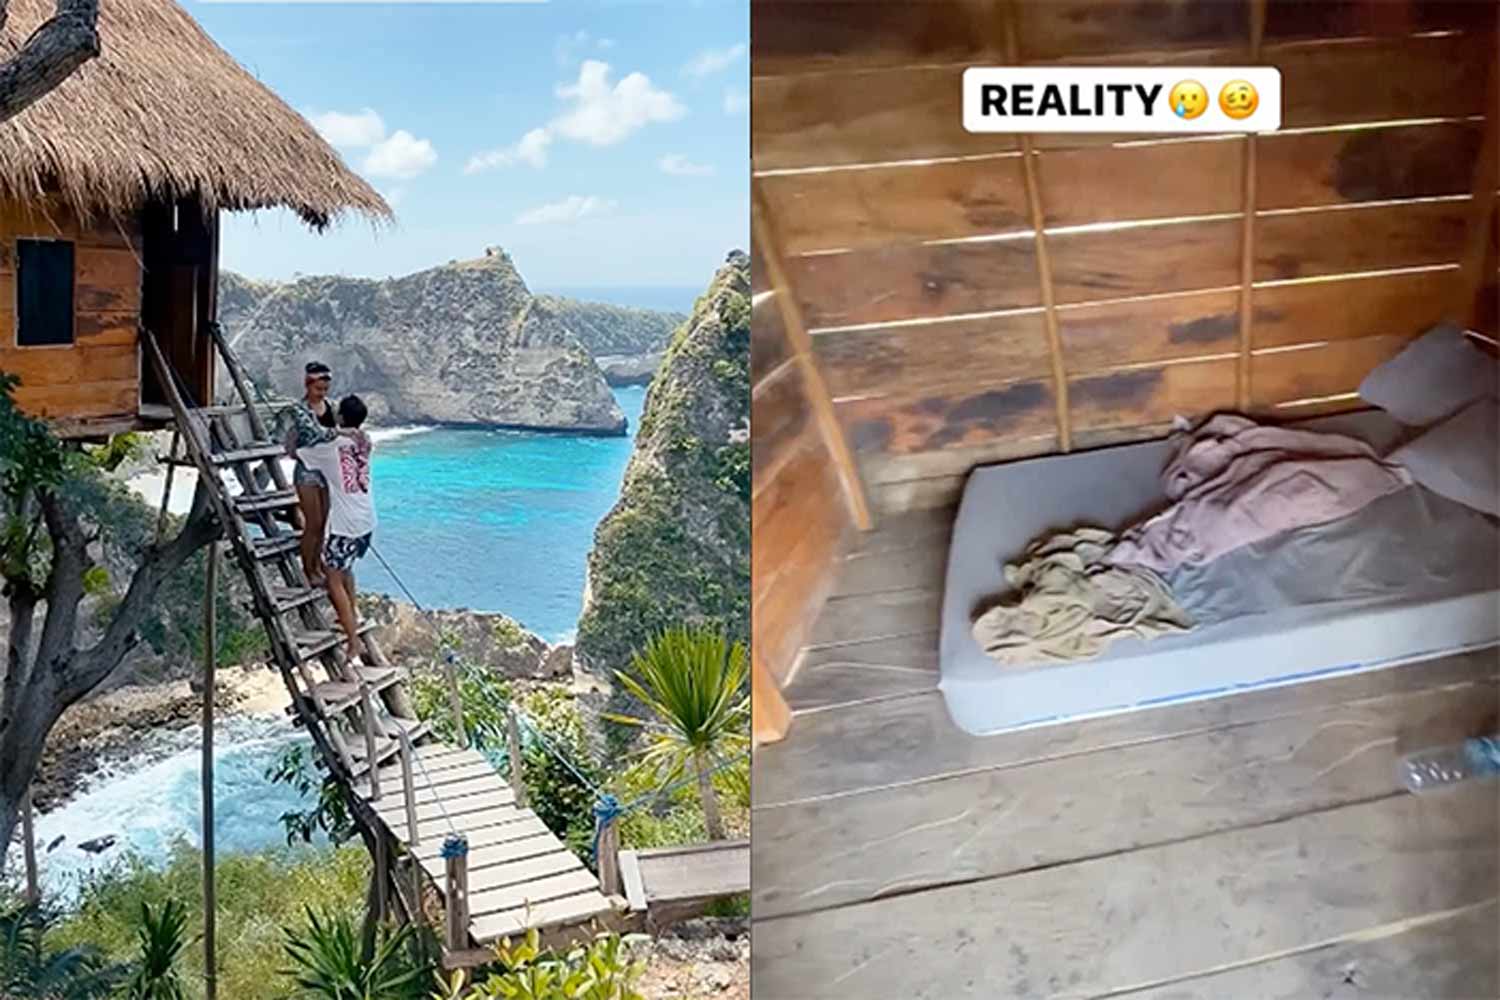 The ‘Ugly Truth’ About Staying In An Instagram-Famous Treehouse